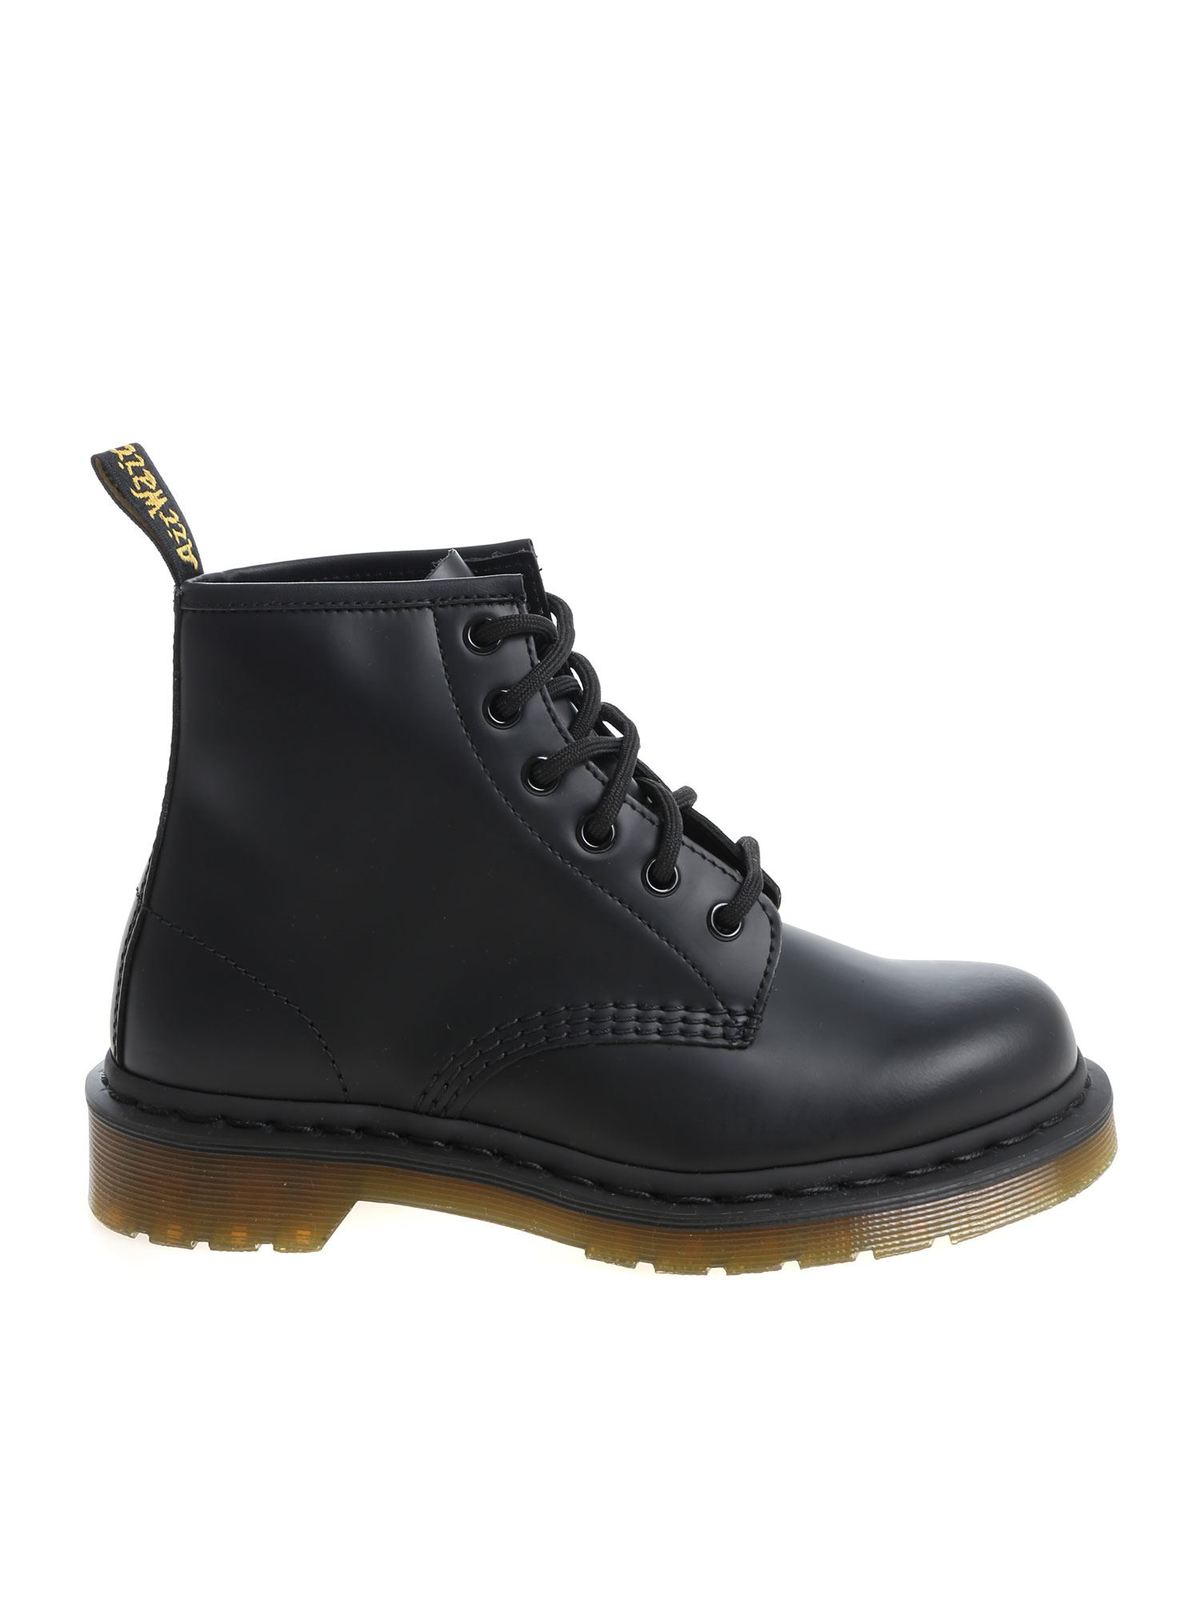 DR. MARTENS' 101 LEATHER ANKLE BOOTS